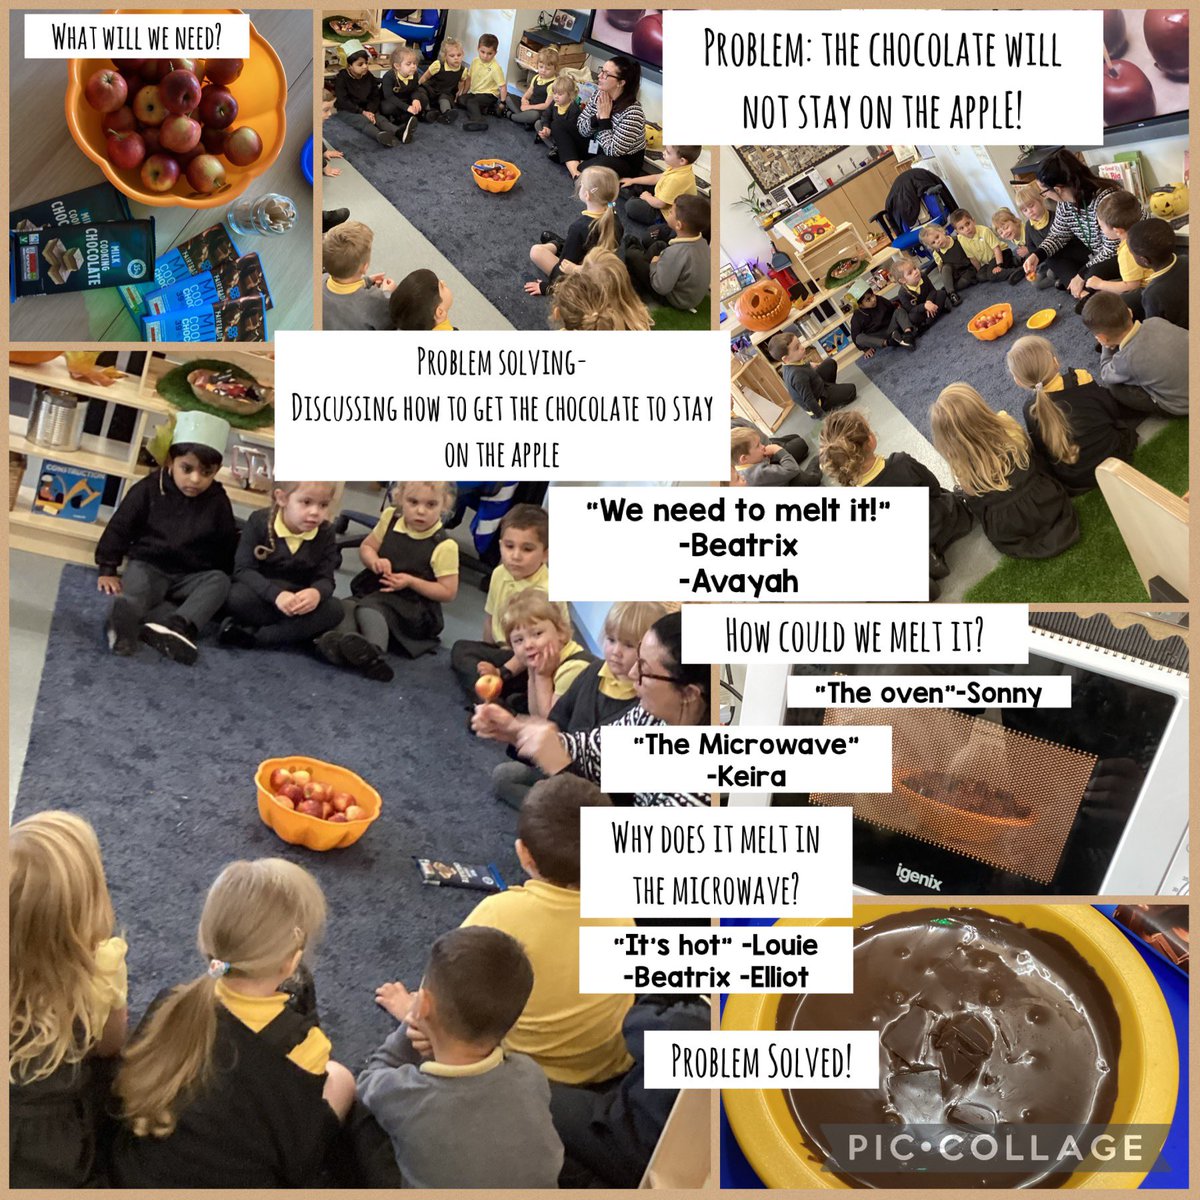 PROBLEM SOLVING in NURSERY …how can we get the chocolate to stay on our apples? #chocolatecoveredapples
#UtW #thinking #problemsolving #sharingideas #discussing  
#learningthroughPLAY #learningthroughexperiences #meaningfulopportunities @mesne_lea